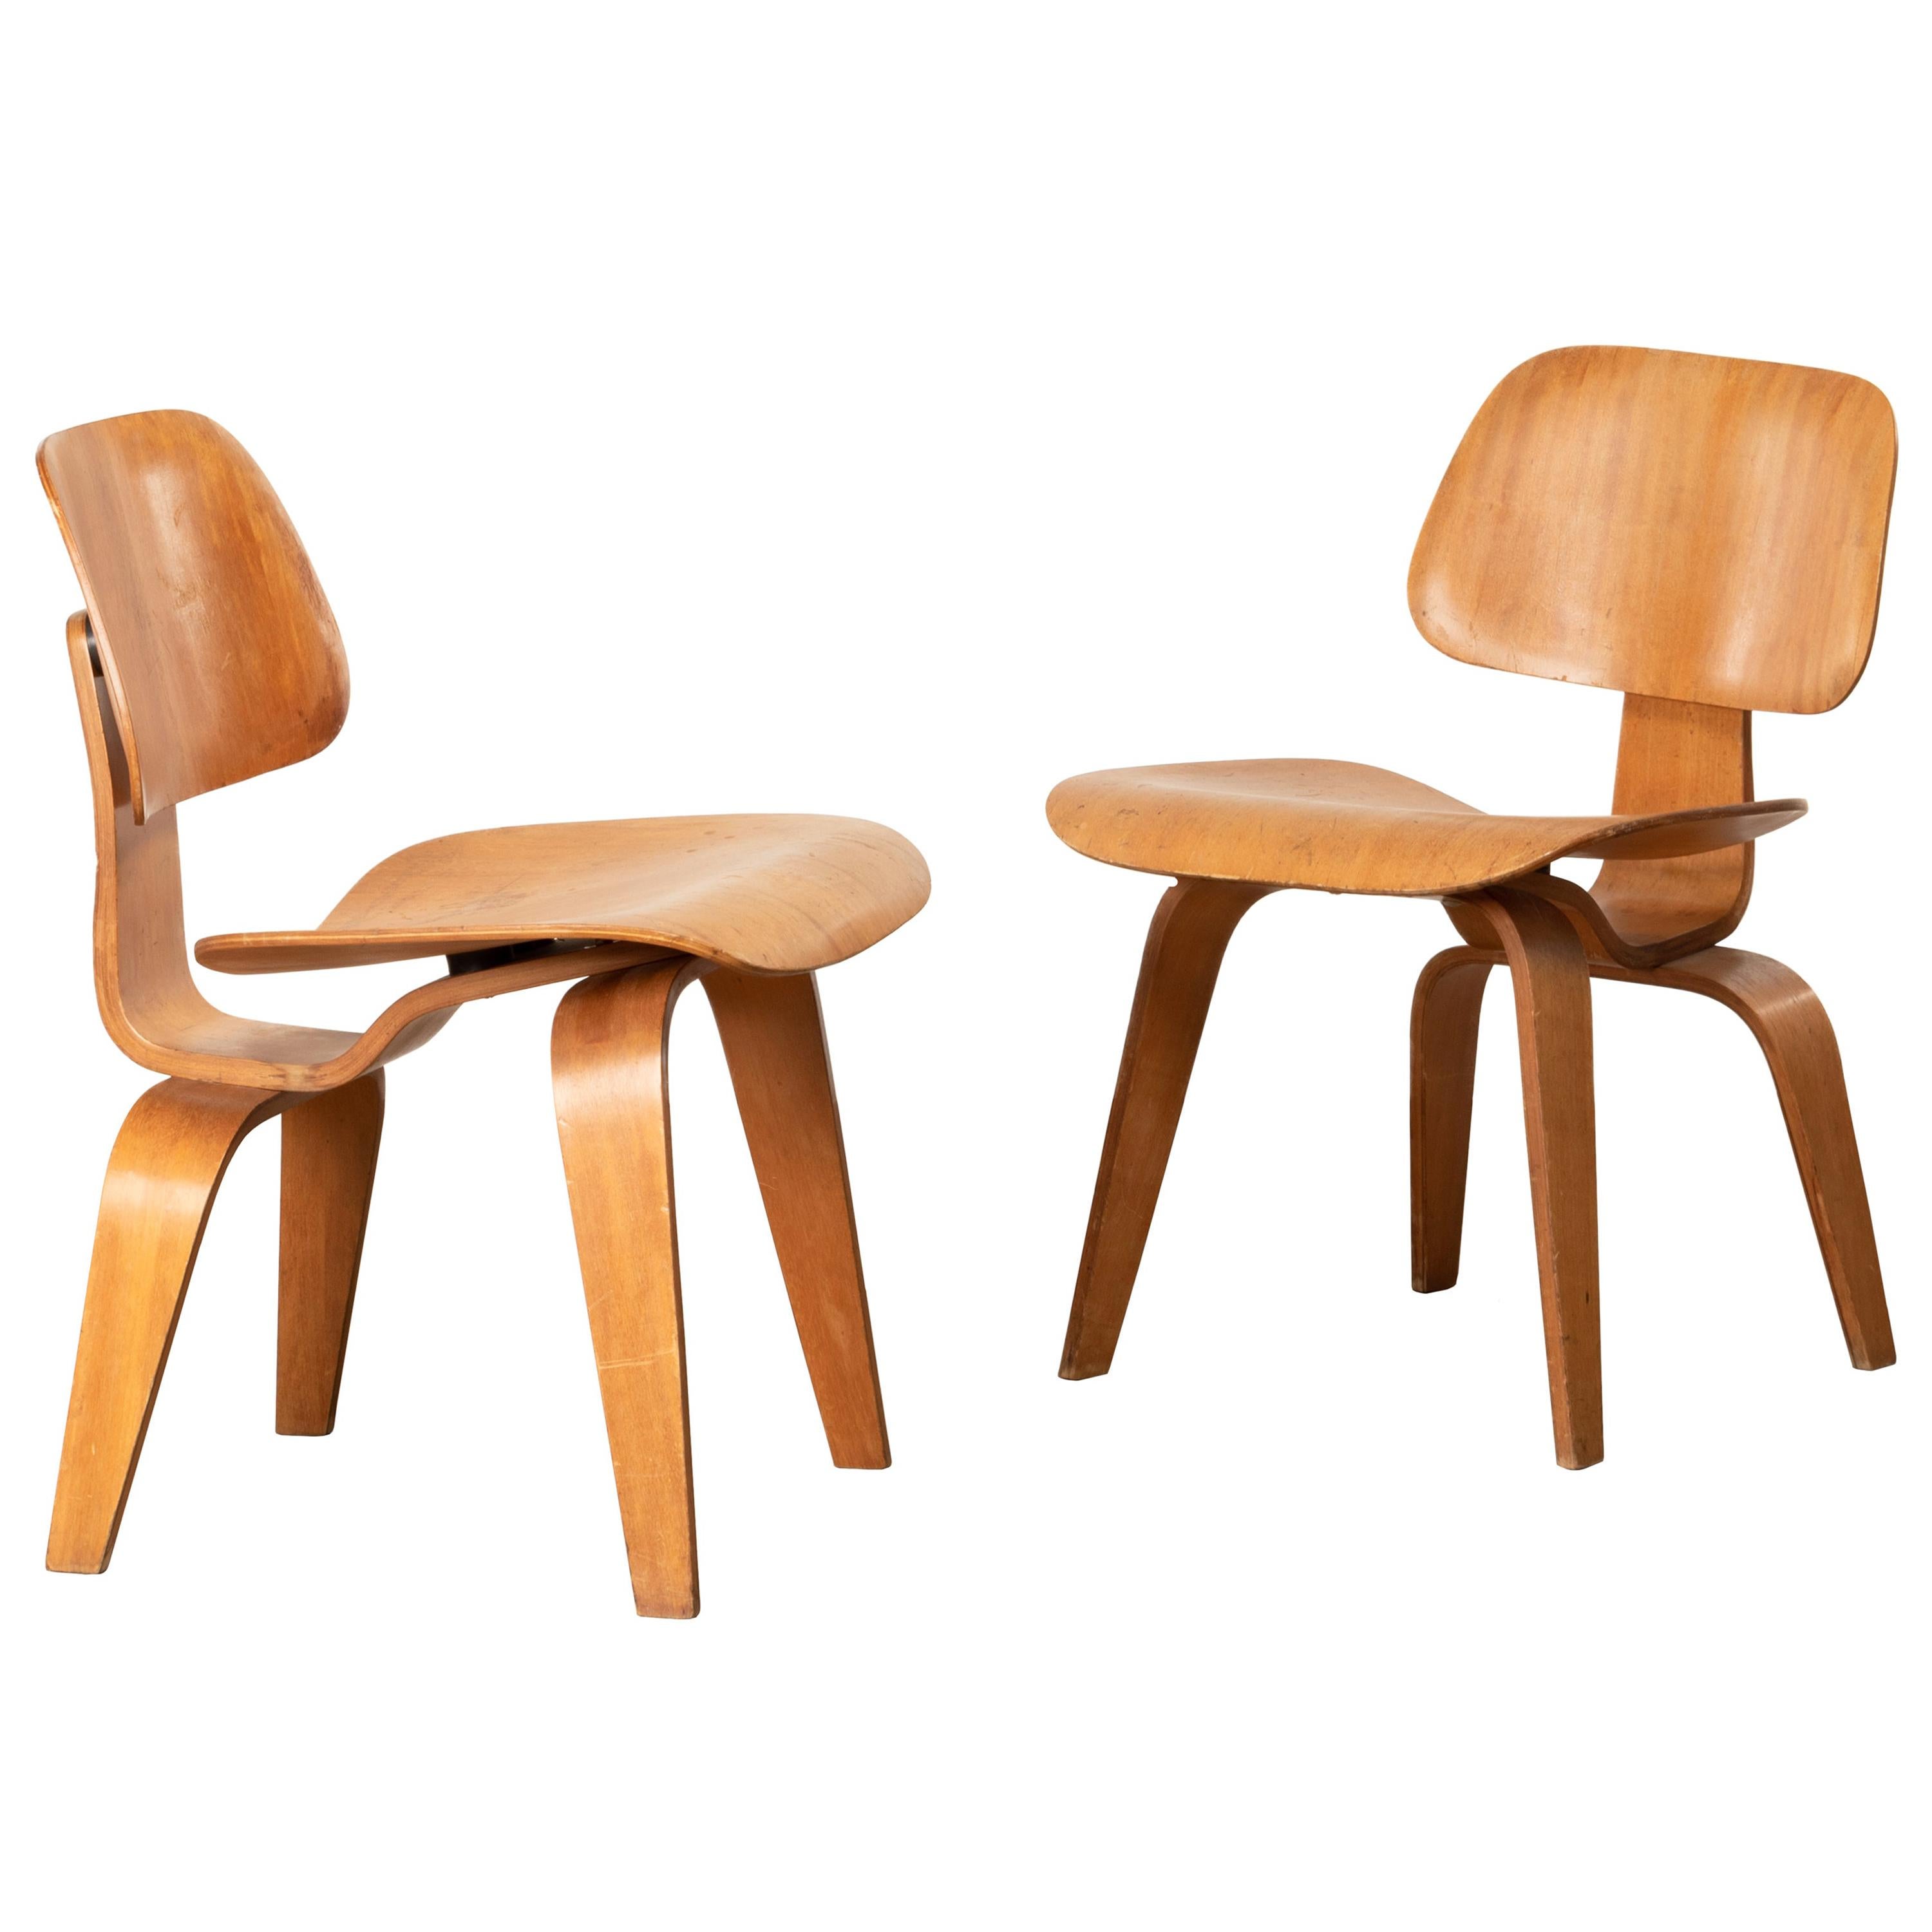 Charles and Ray Eames Early DCW Mahogany Dining Chairs for Evans Products, 1945